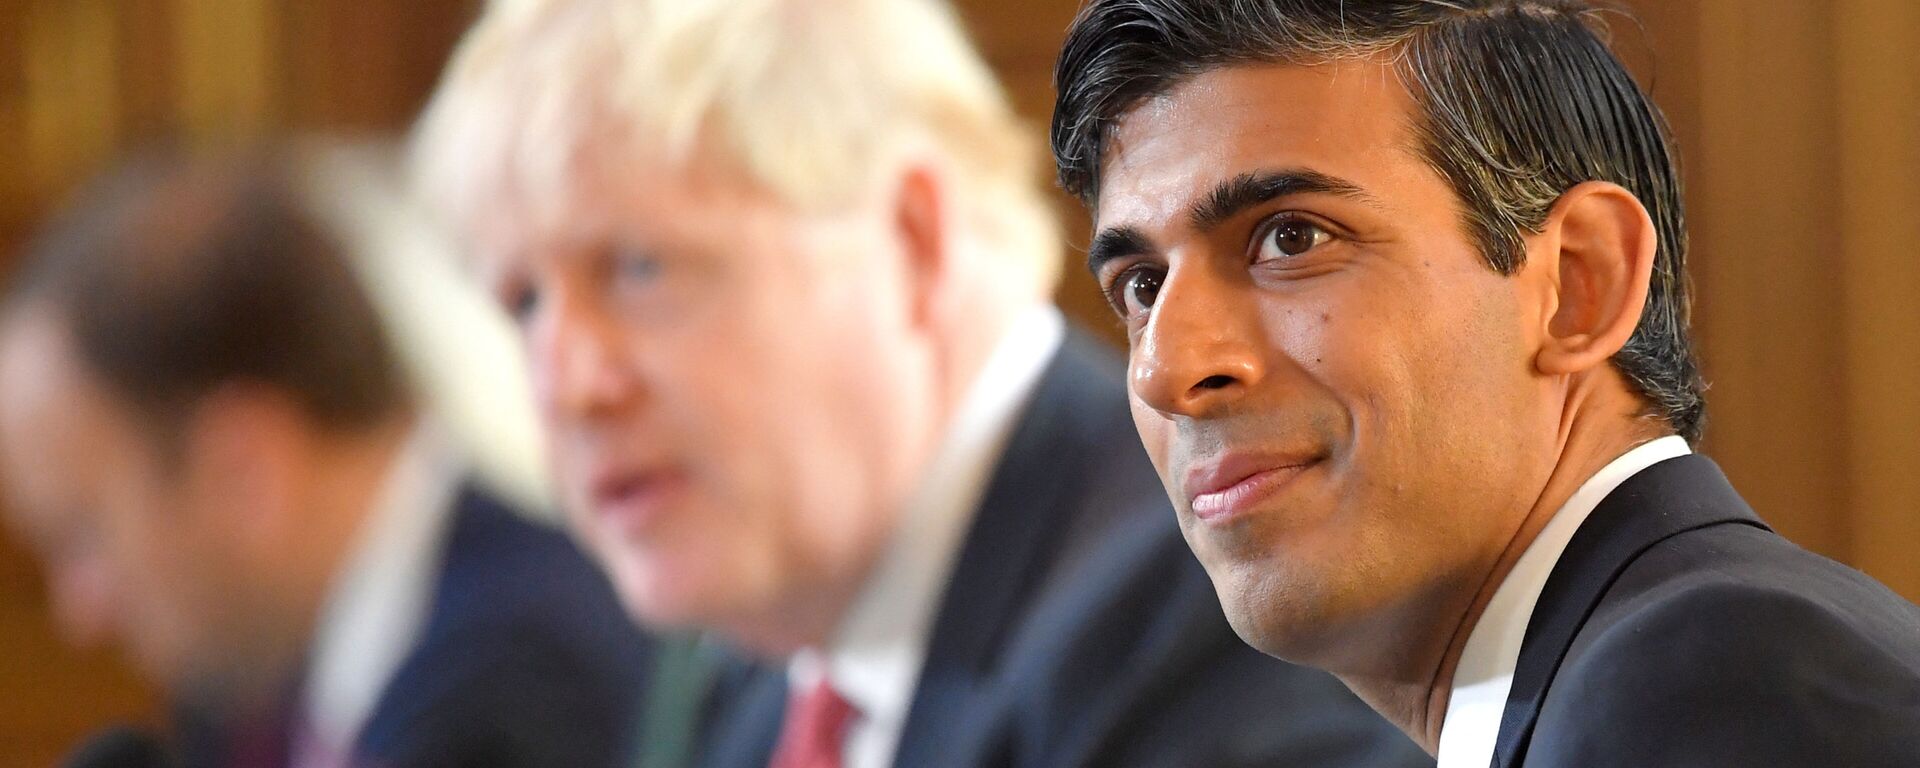 Britain's Chancellor of the Exchequer Rishi Sunak (R) sits beside Britain's Prime Minister Boris Johnson (C) at a Cabinet meeting of senior government ministers at the Foreign and Commonwealth Office (FCO) in London on September 1, 2020.  - Sputnik International, 1920, 14.01.2022